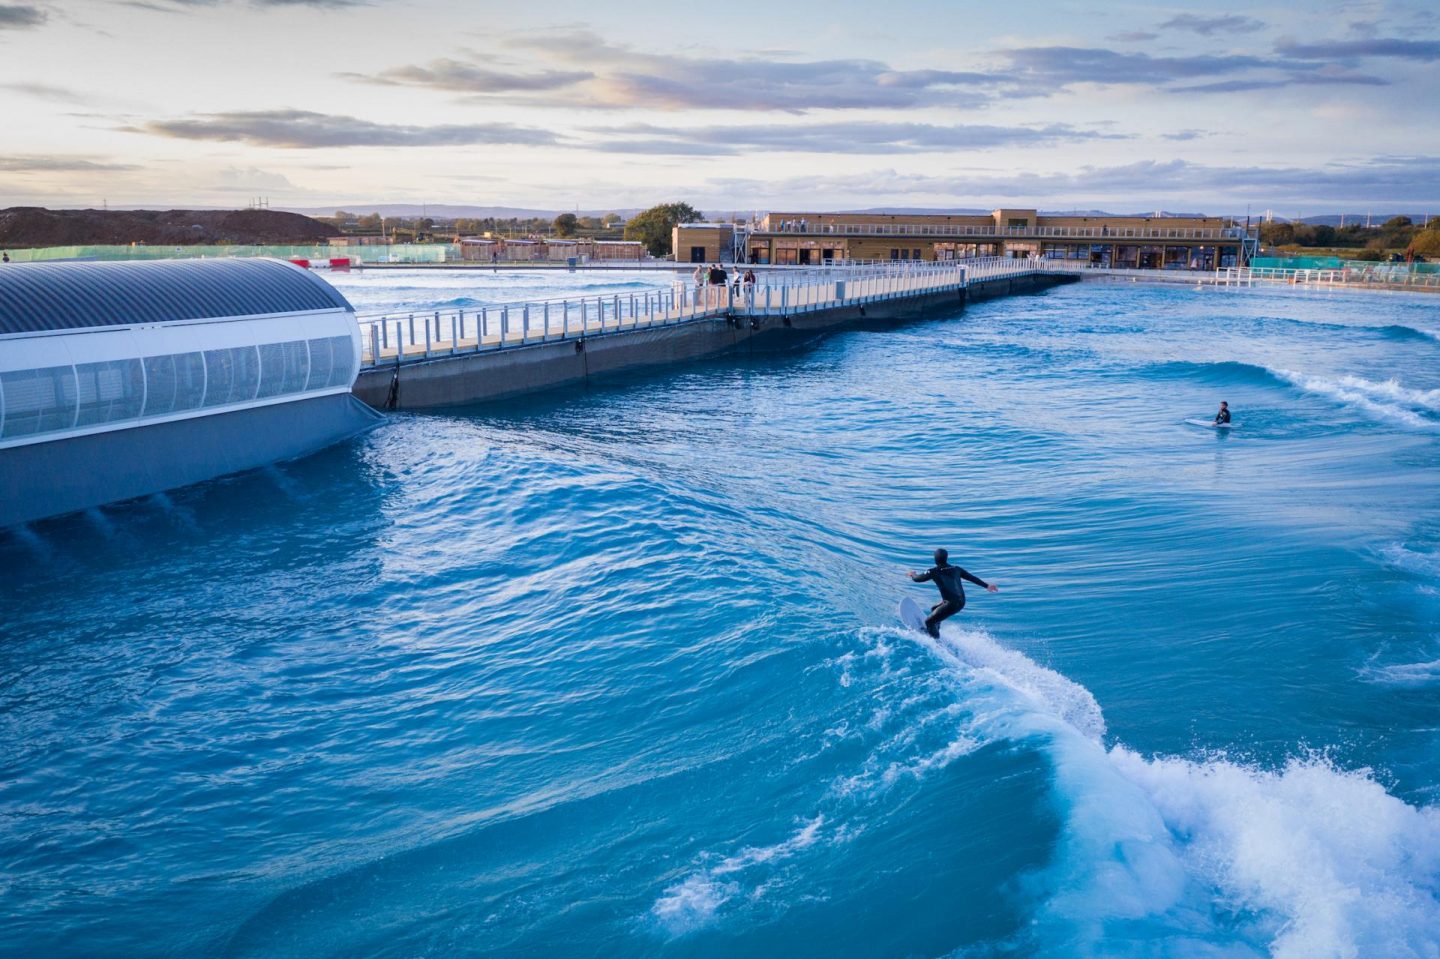 What it’s like to surf The Wave, Bristol’s artificial surf wave